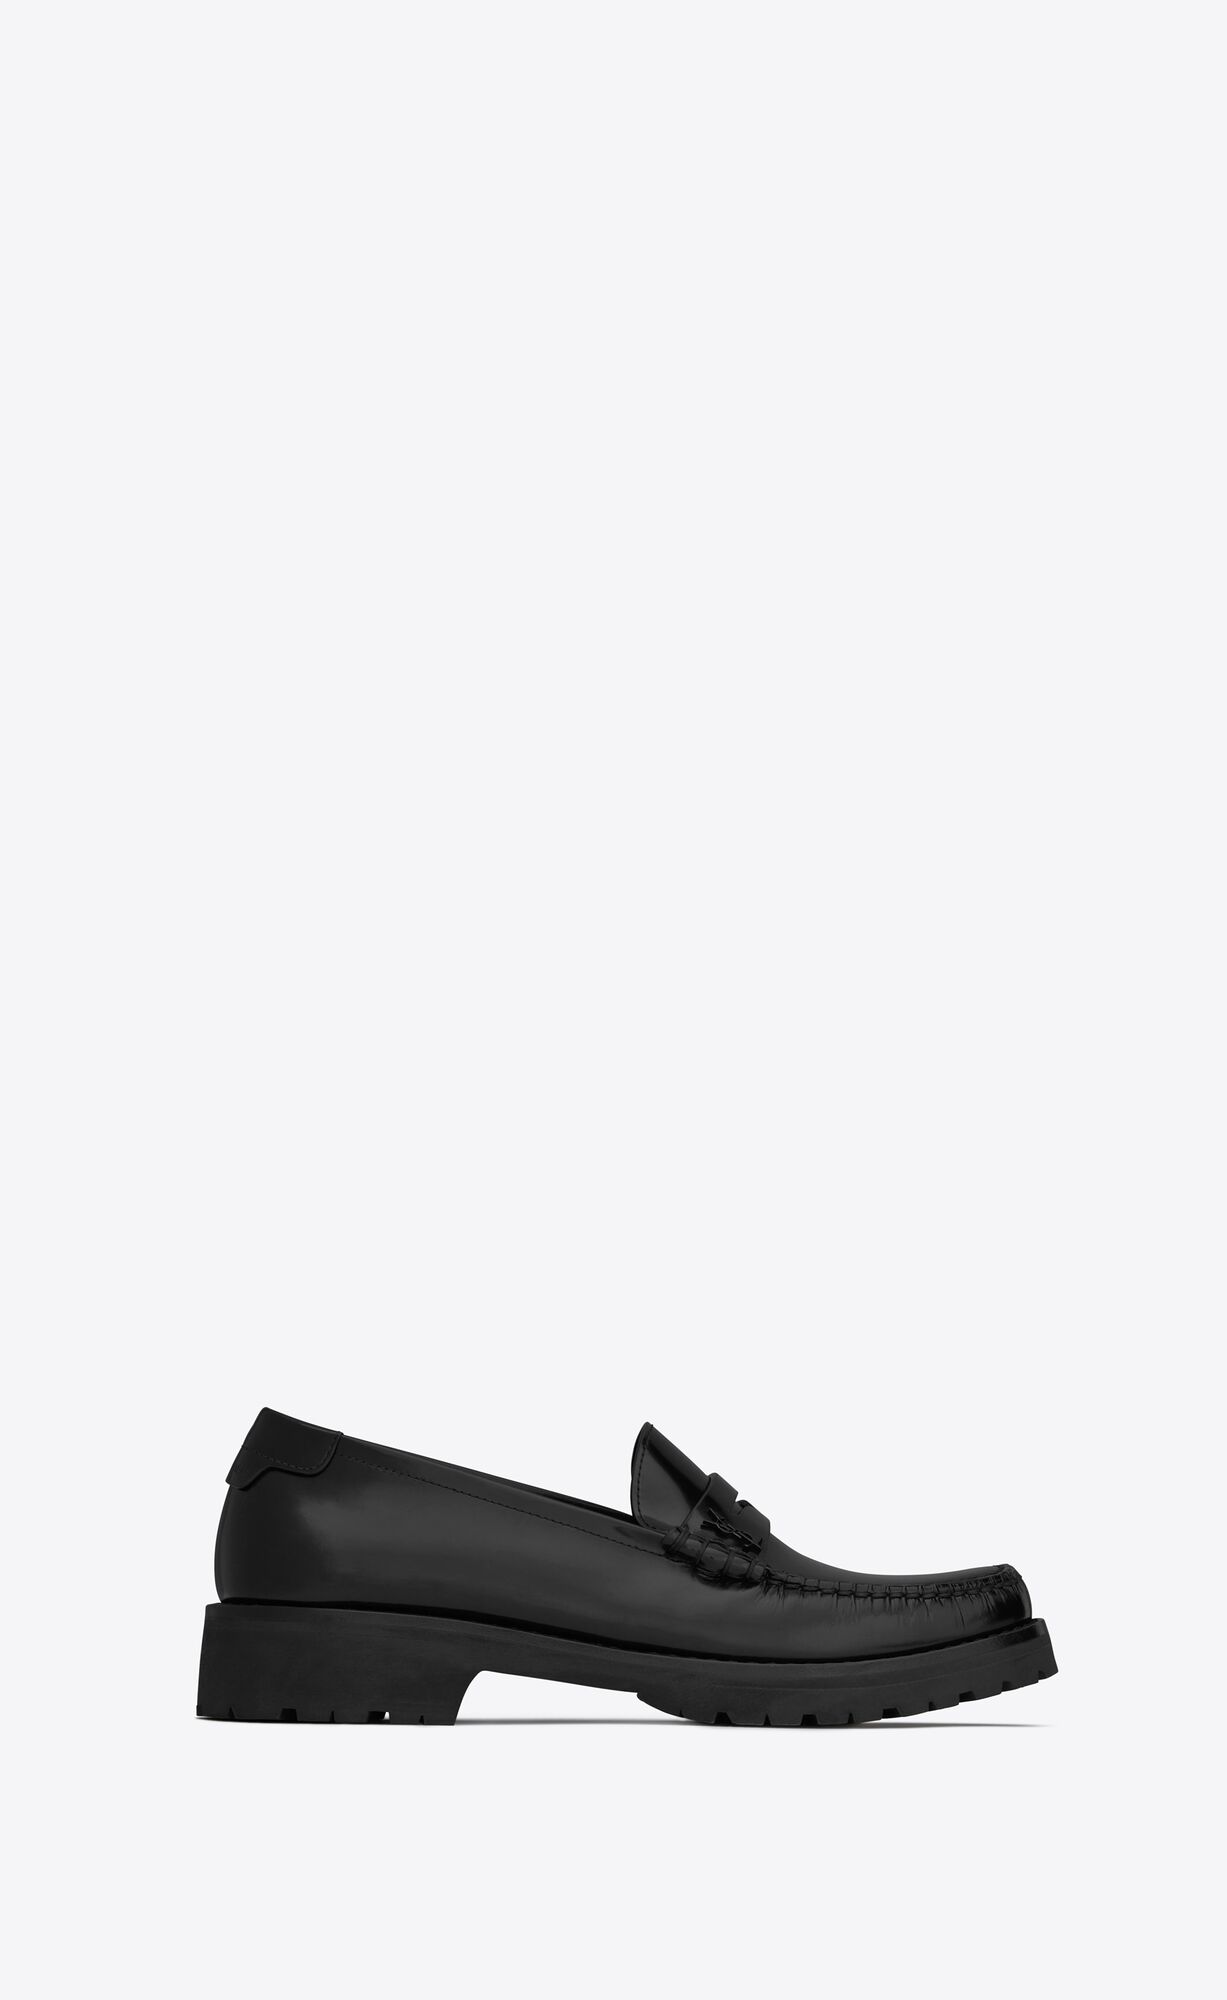 Le Loafer chunky penny slippers in glazed leather | Saint Laurent | YSL.com